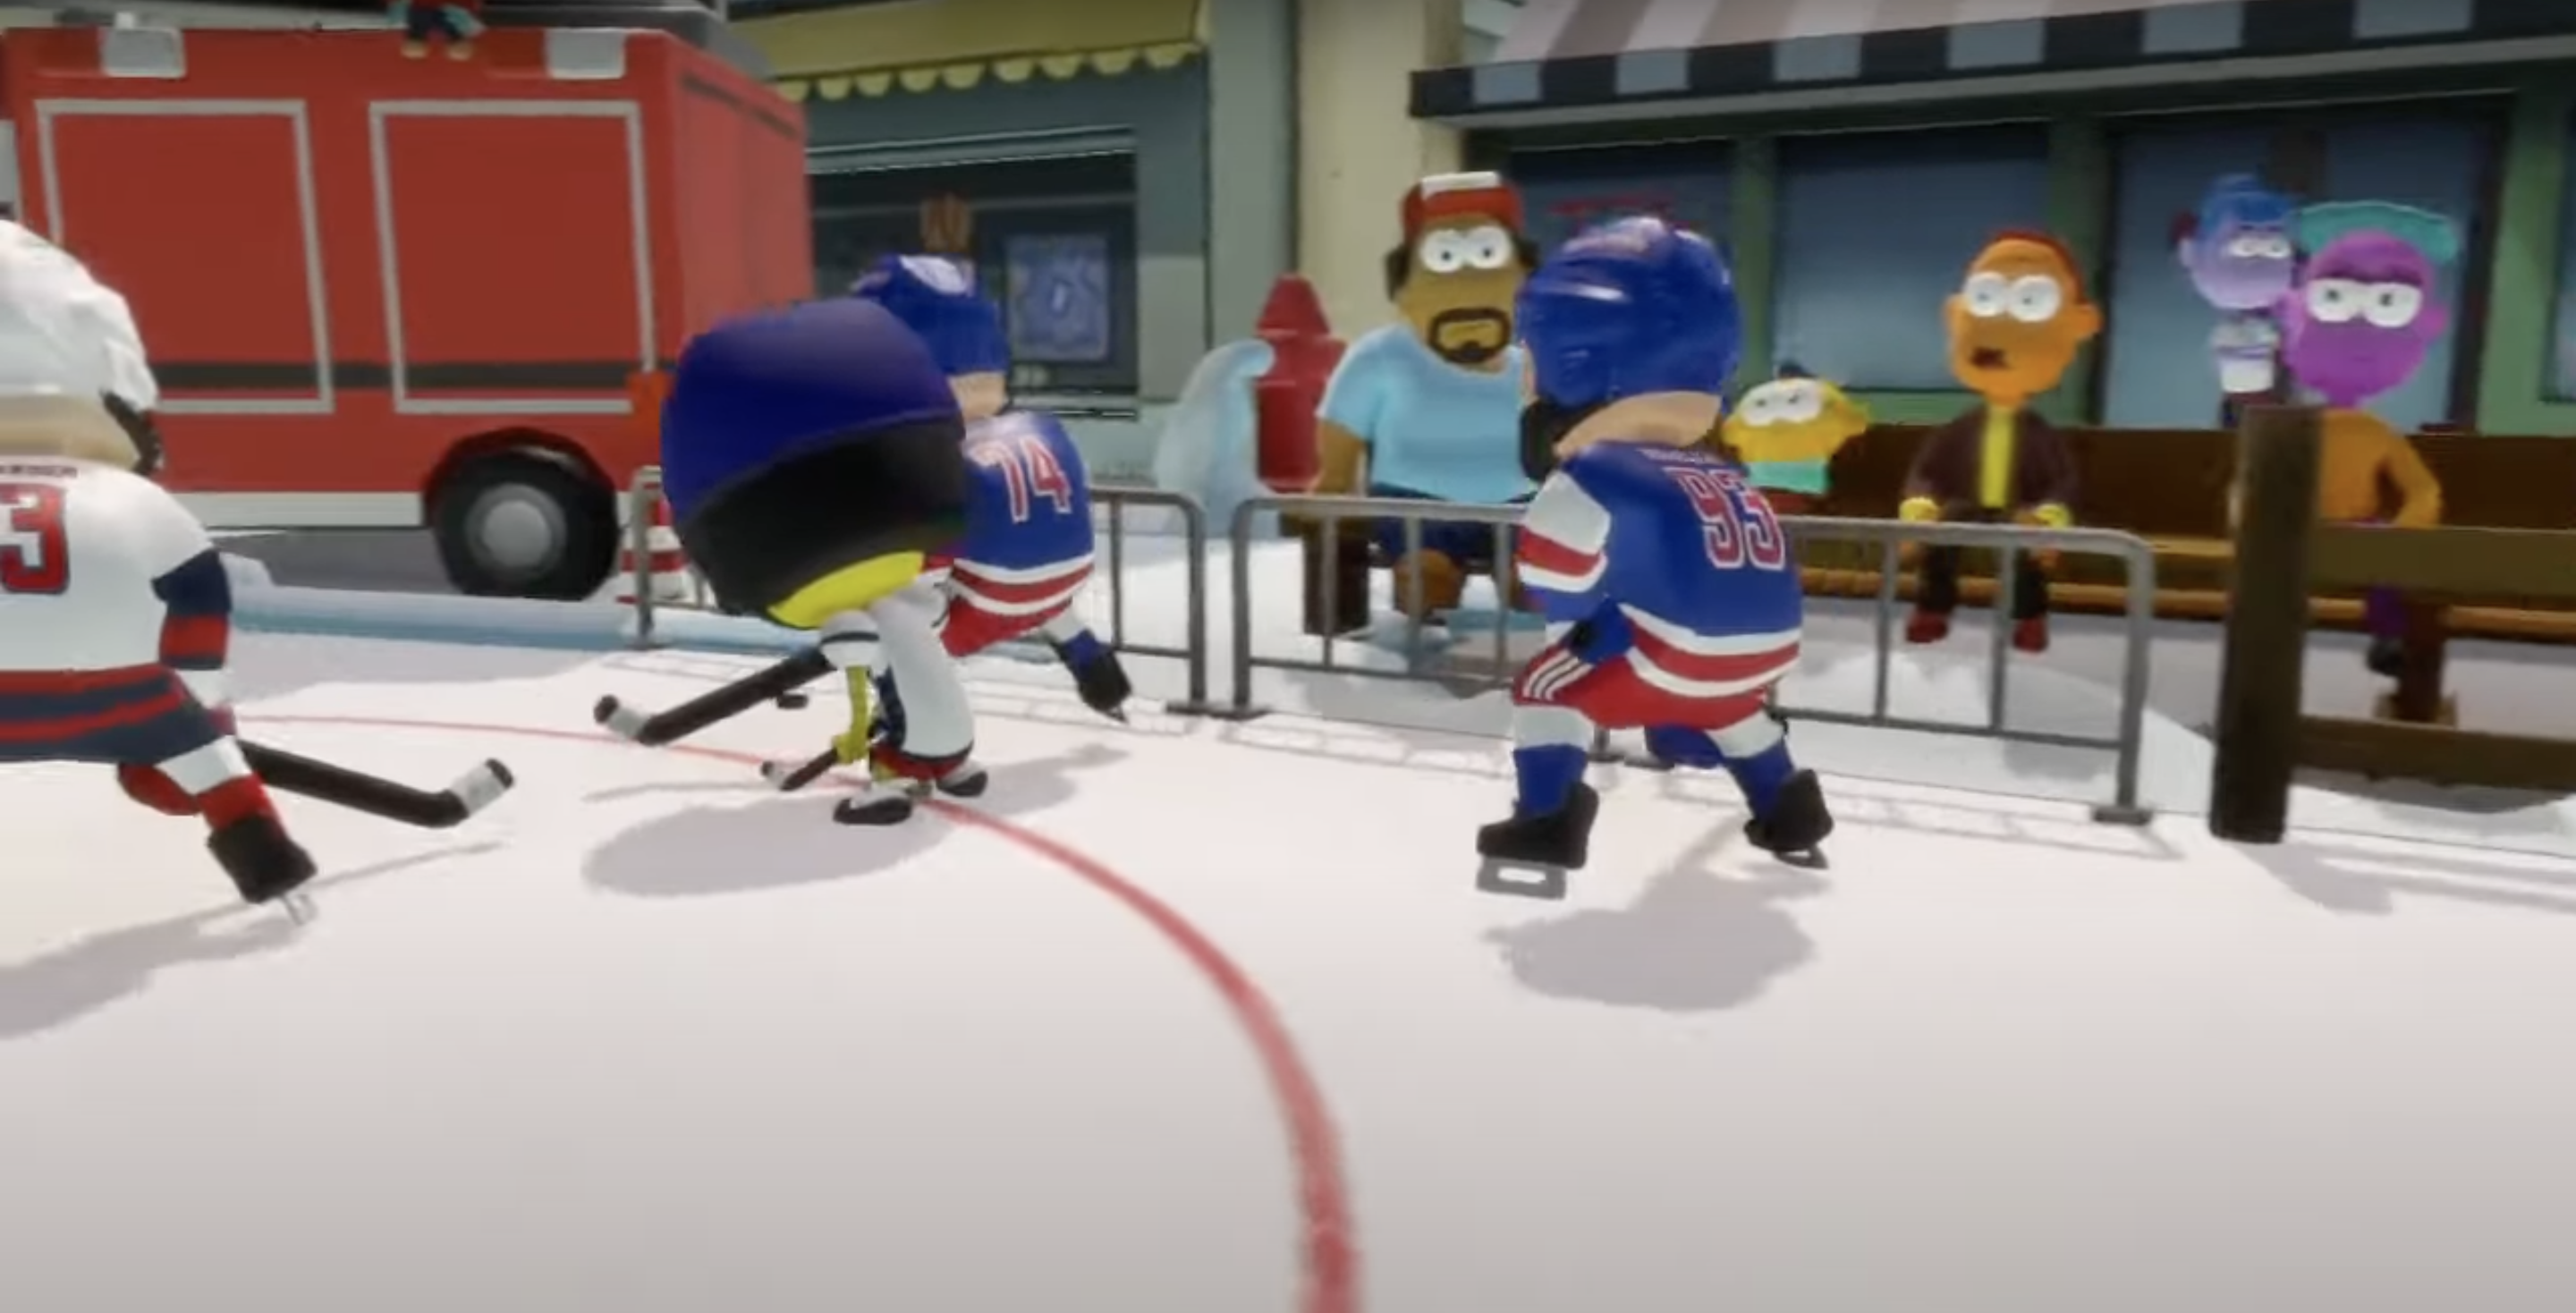 NHL's animated broadcast of Rangers-Capitals turning heads on social media